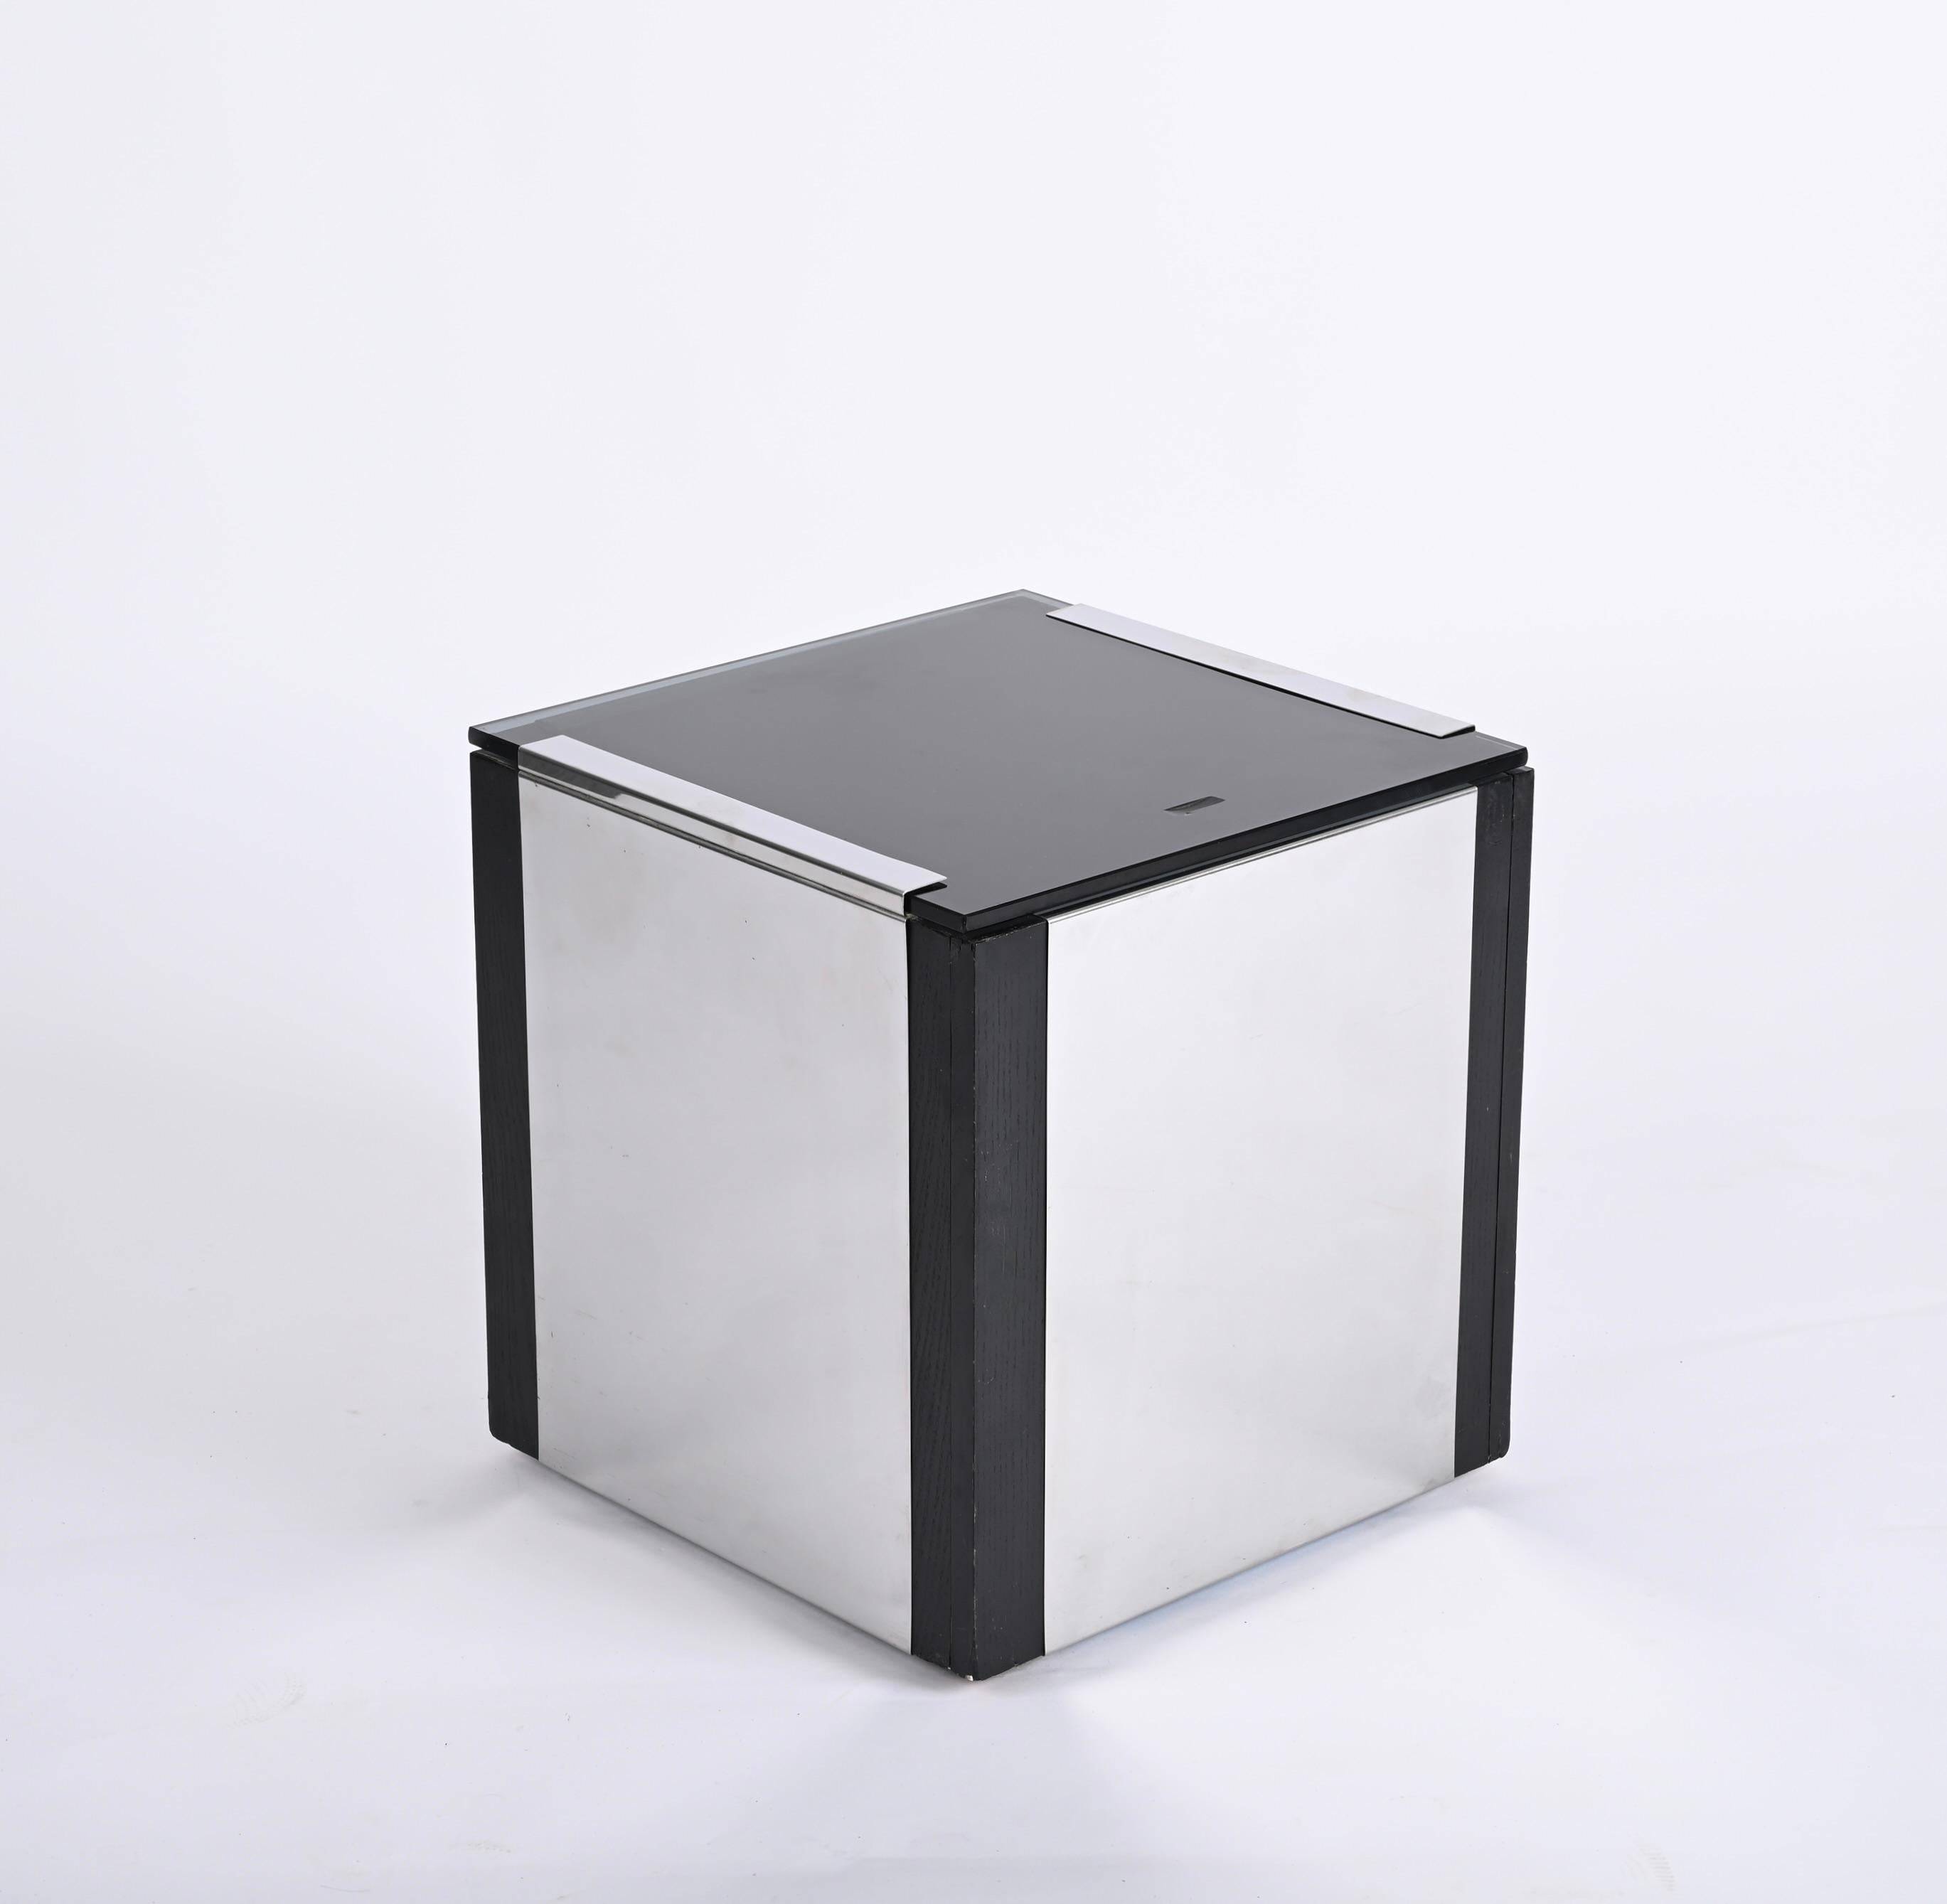 Willy Rizzo Midcentury Cubic Chromed Steel, Wood and Glass Dry Bar, Italy 1970s For Sale 4